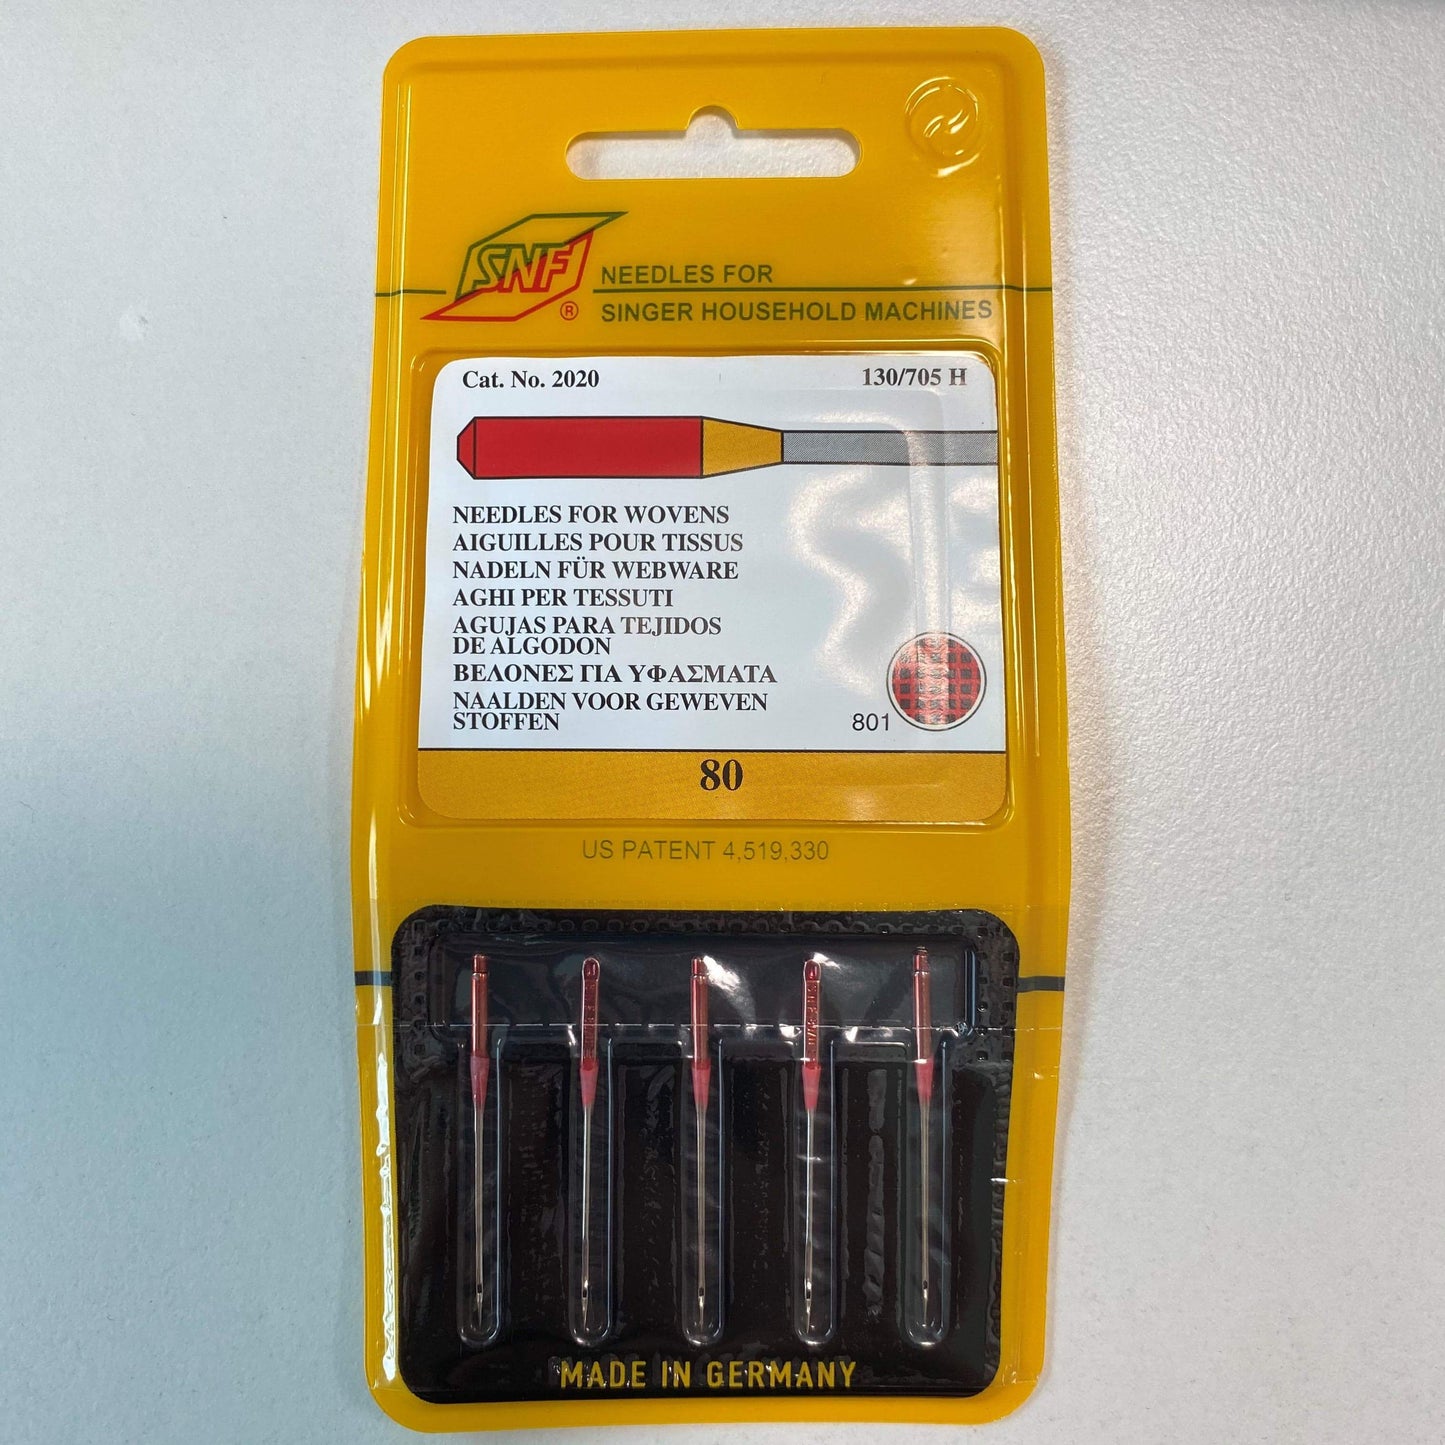 5 x 2020 Medium weight size 80 needles for Singer machines (made in Germany)